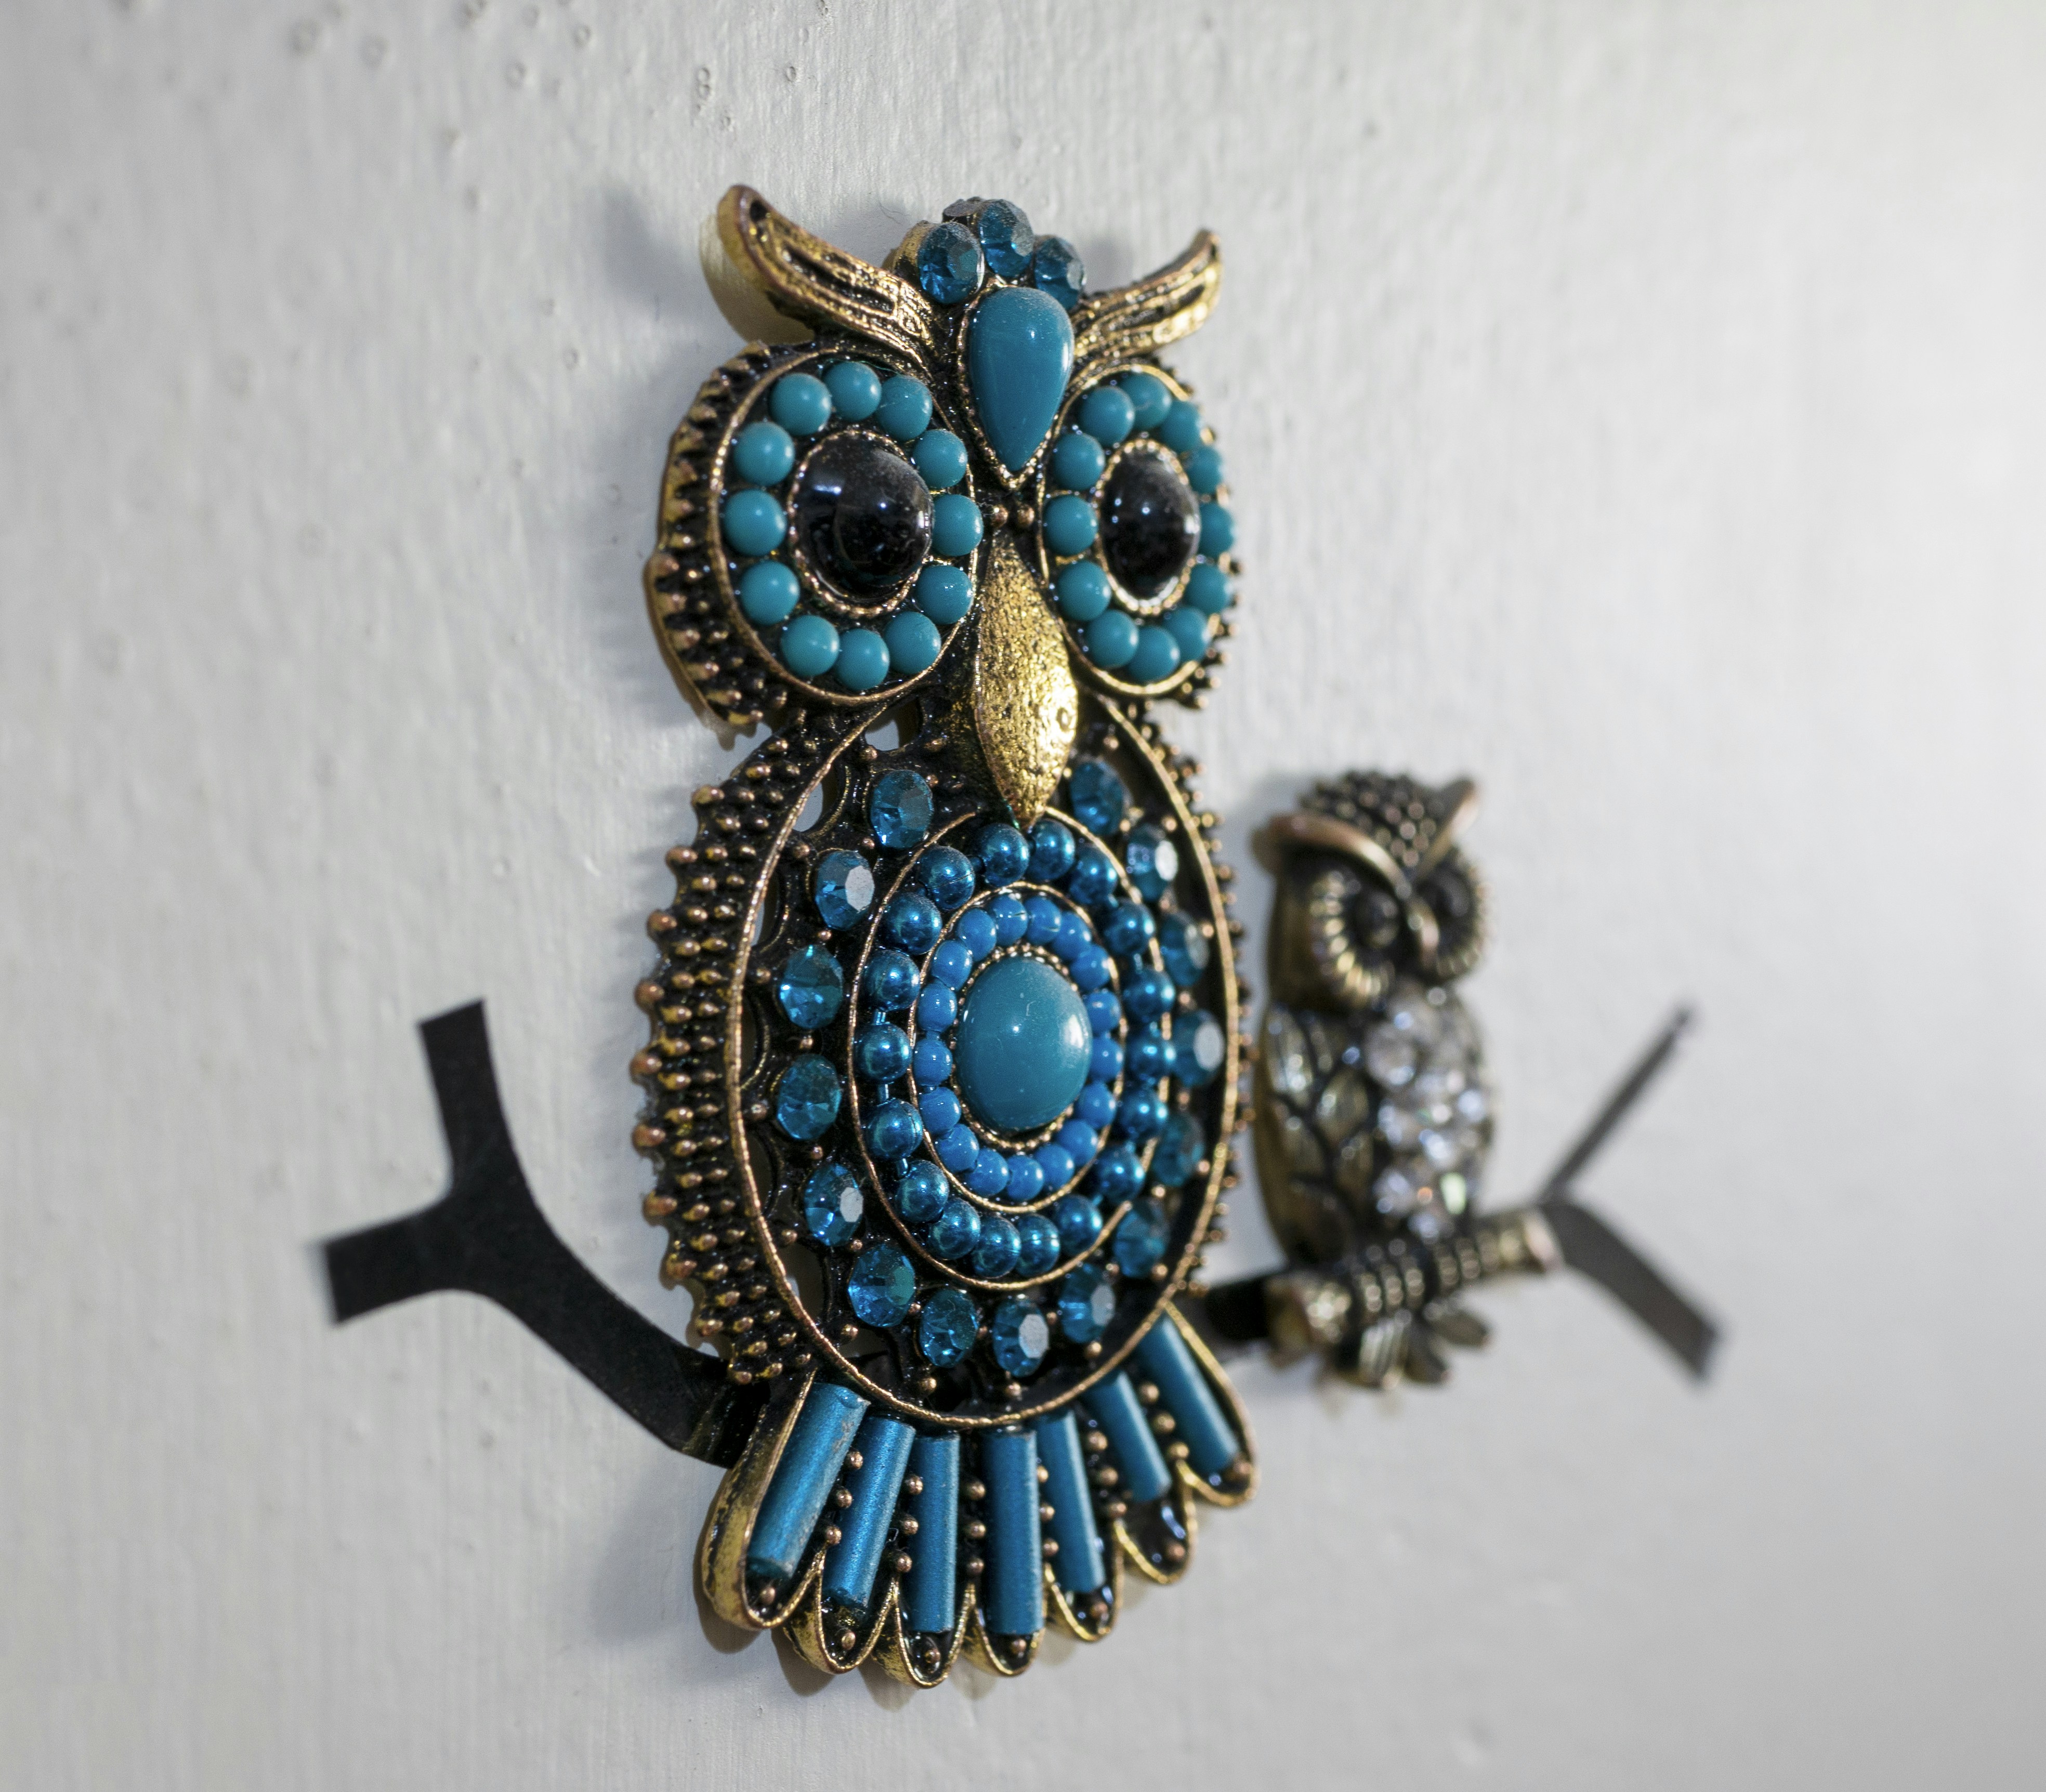 Owl pendants displayed as decoration on a white wall